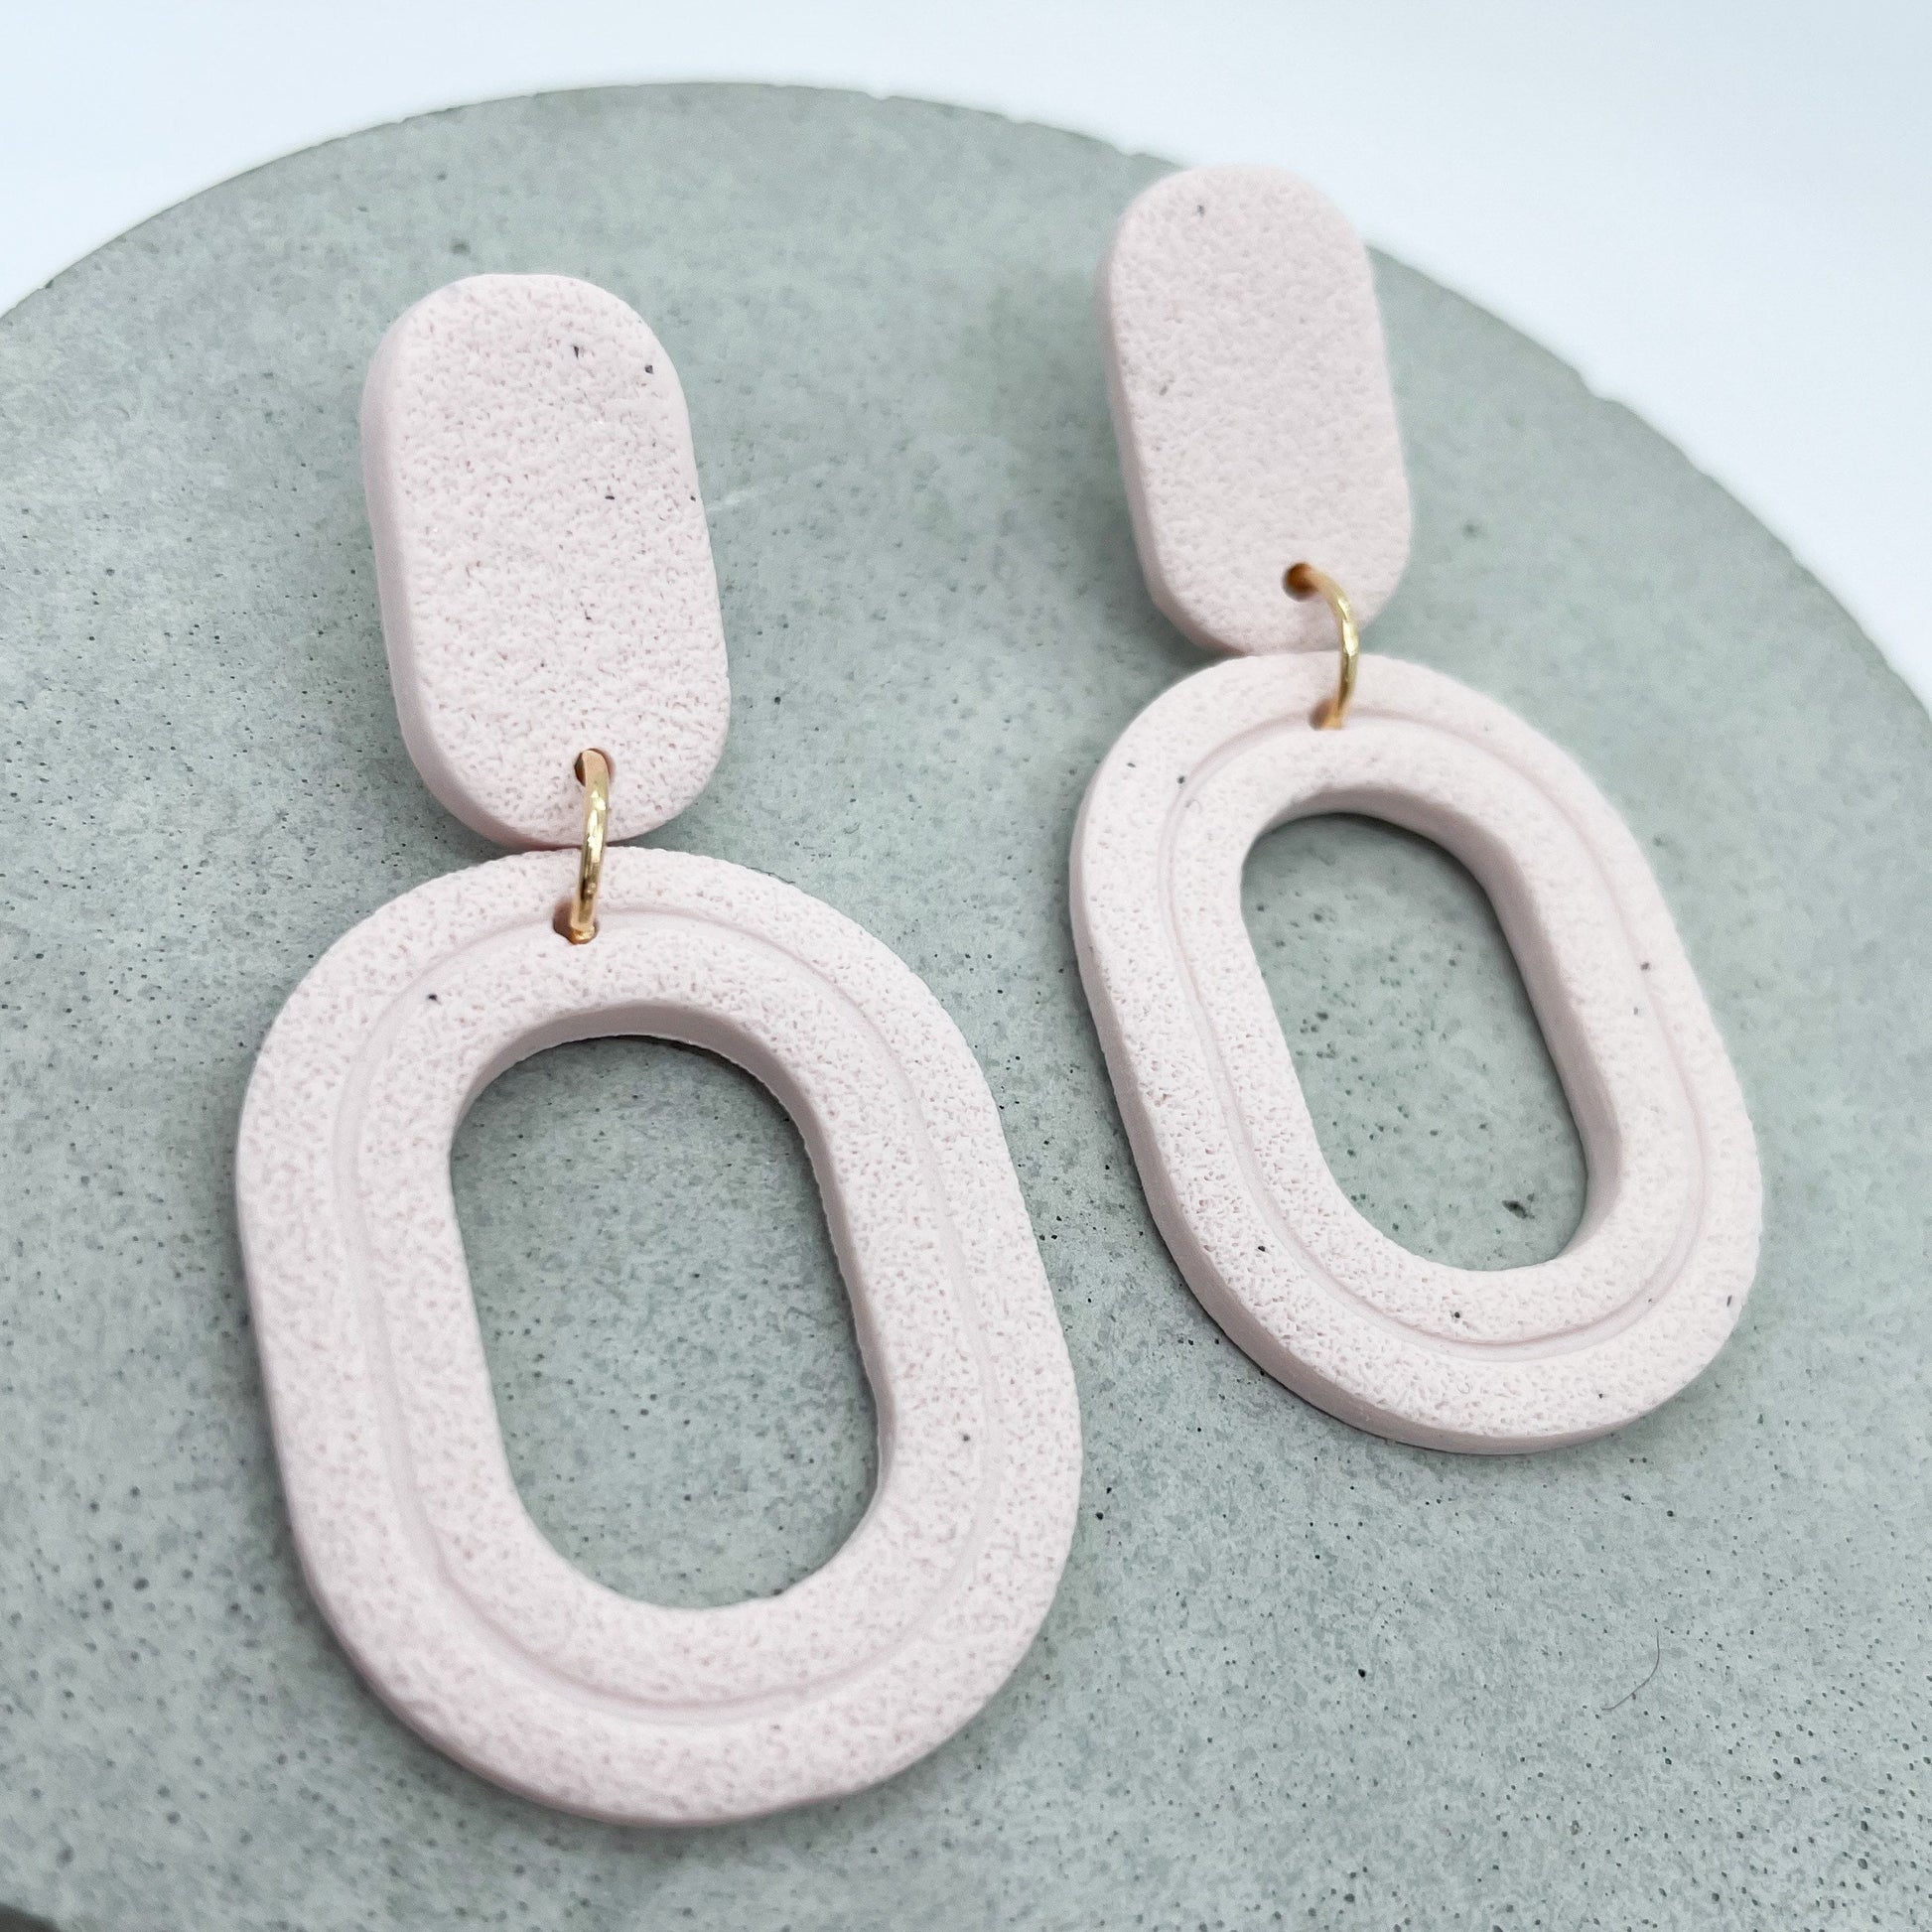 Pink polymer clay earrings, textured clay earrings, galentine gift, post box gift, best friend birthday gift, valentines girlfriend gift,